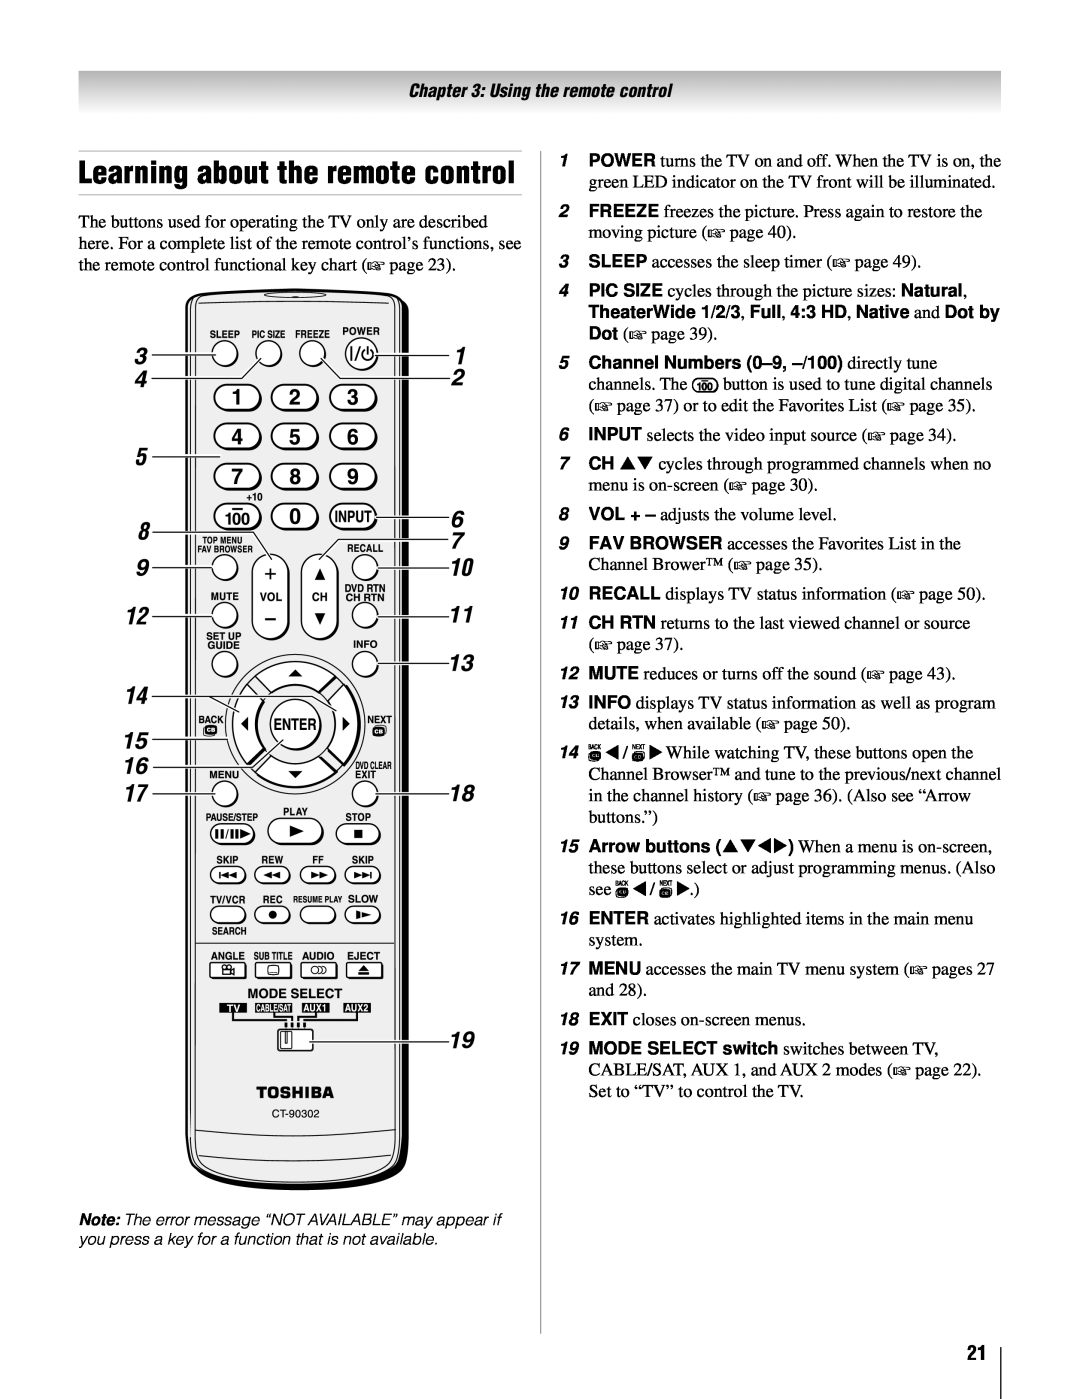 Toshiba 37AV502U, 32AV502U, 32AV50SU, 37AV52U, 26AV52U, 26AV502U Learning about the remote control, Using the remote control 